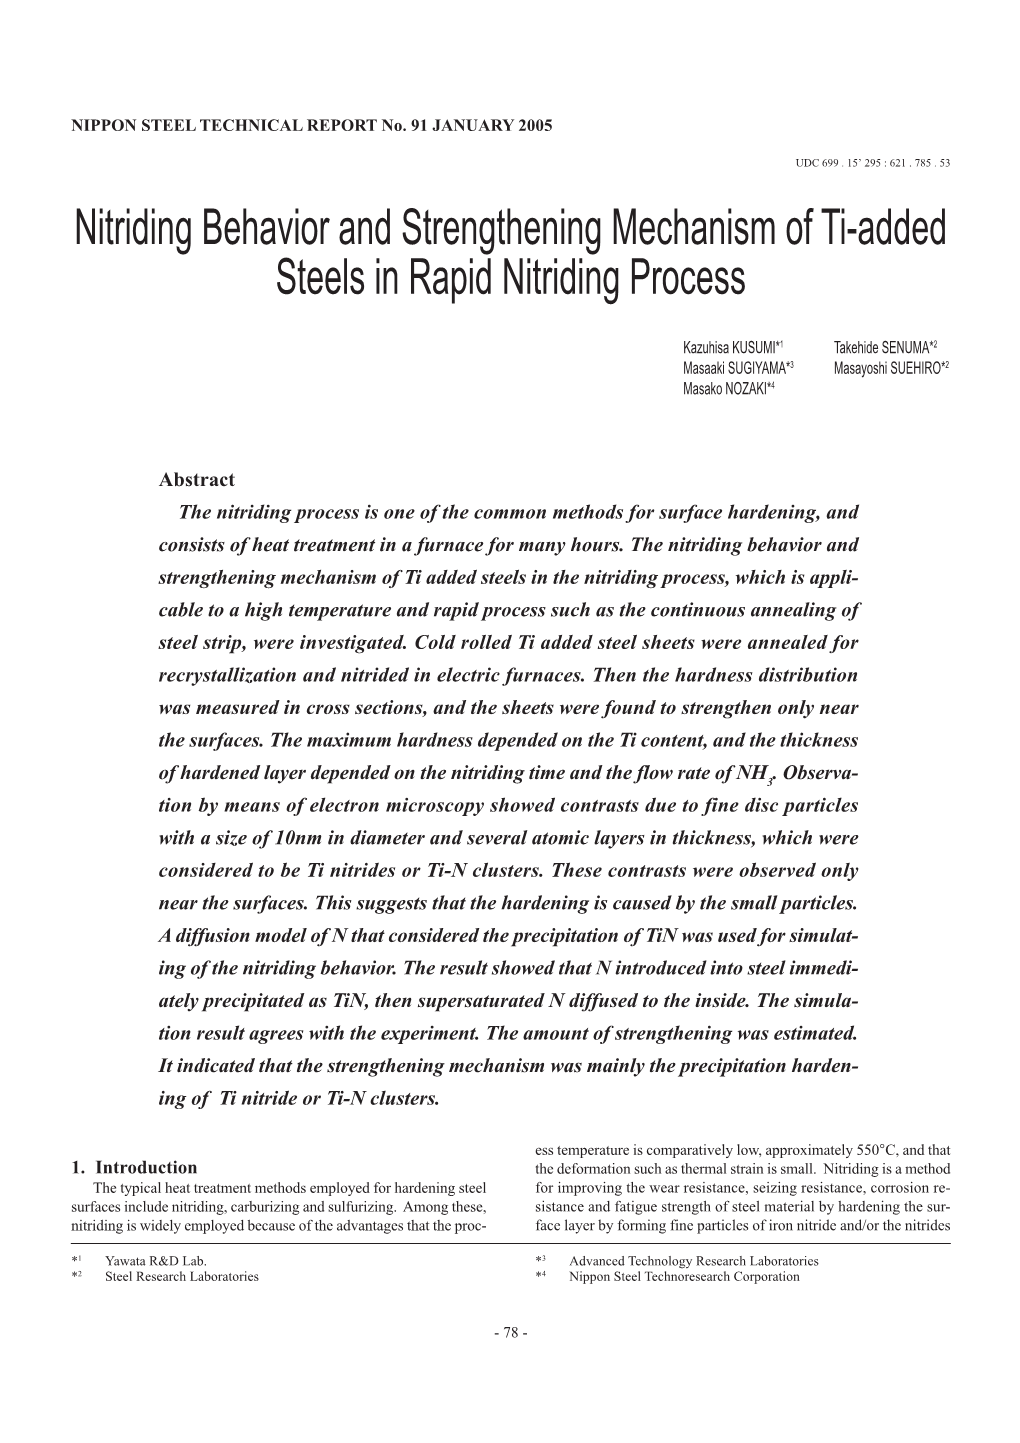 Nitriding Behavior and Strengthening Mechanism of Ti-Added Steels in Rapid Nitriding Process